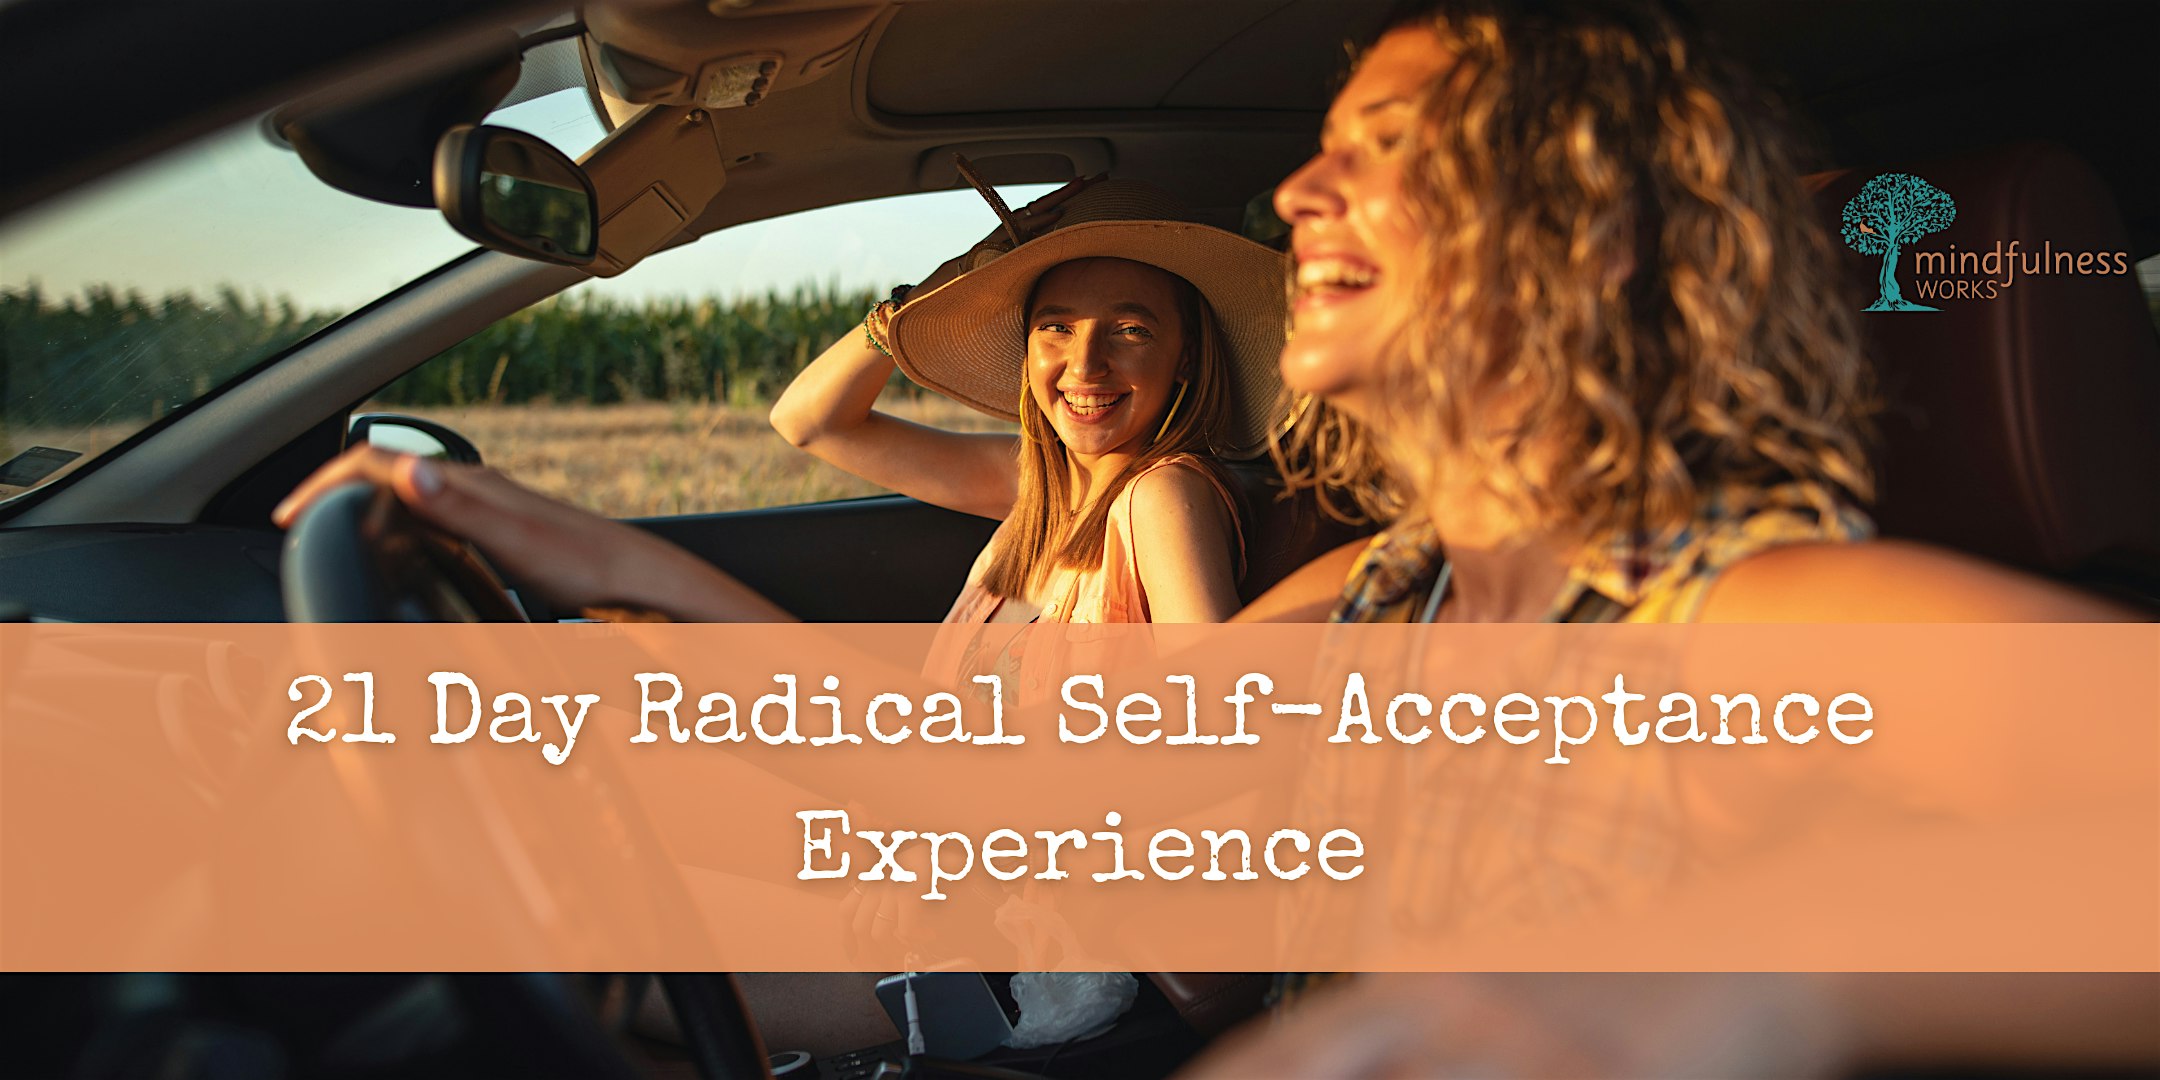 21 Day Radical Self-Acceptance Experience